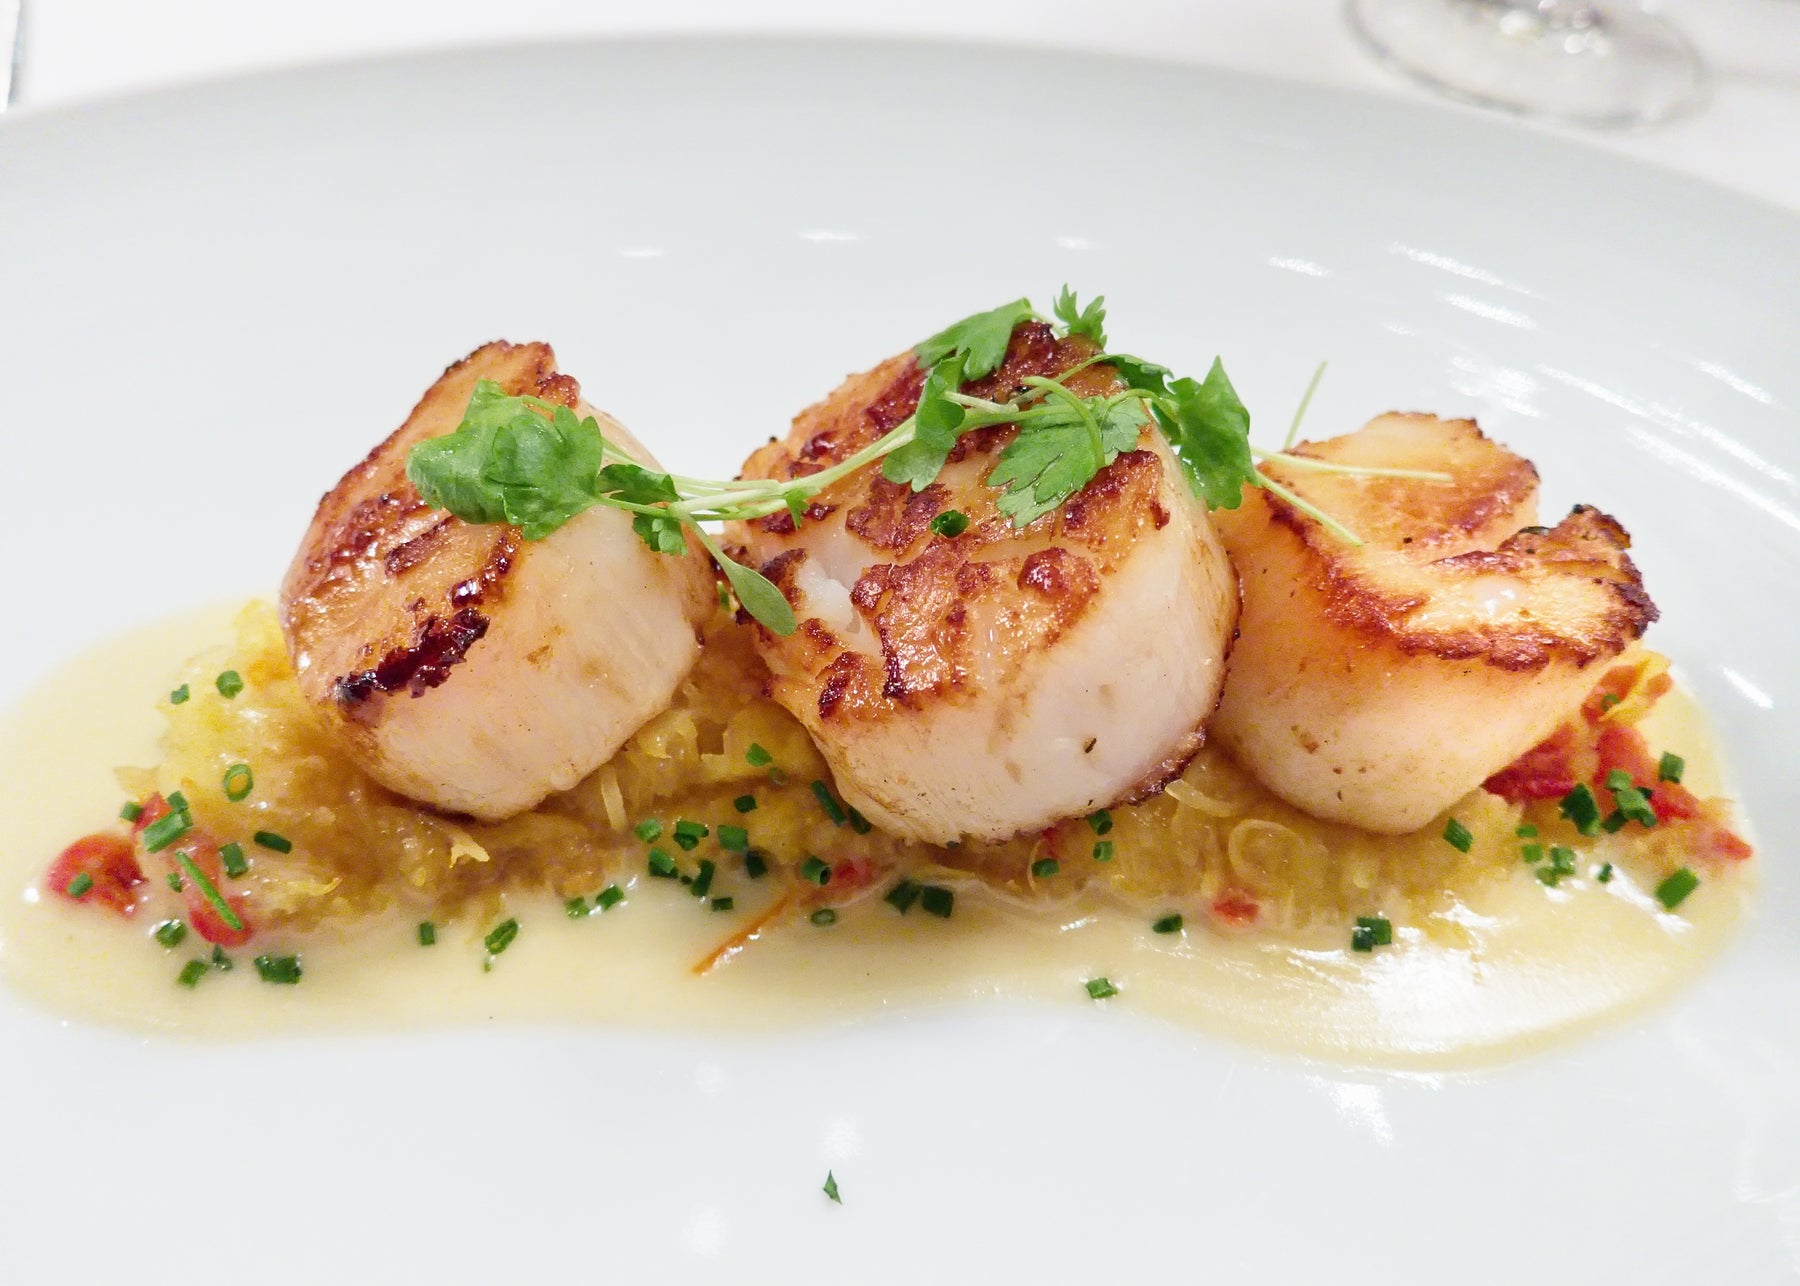 "Met Scallops" by ralph and jenny is licensed under CC BY 2.0.